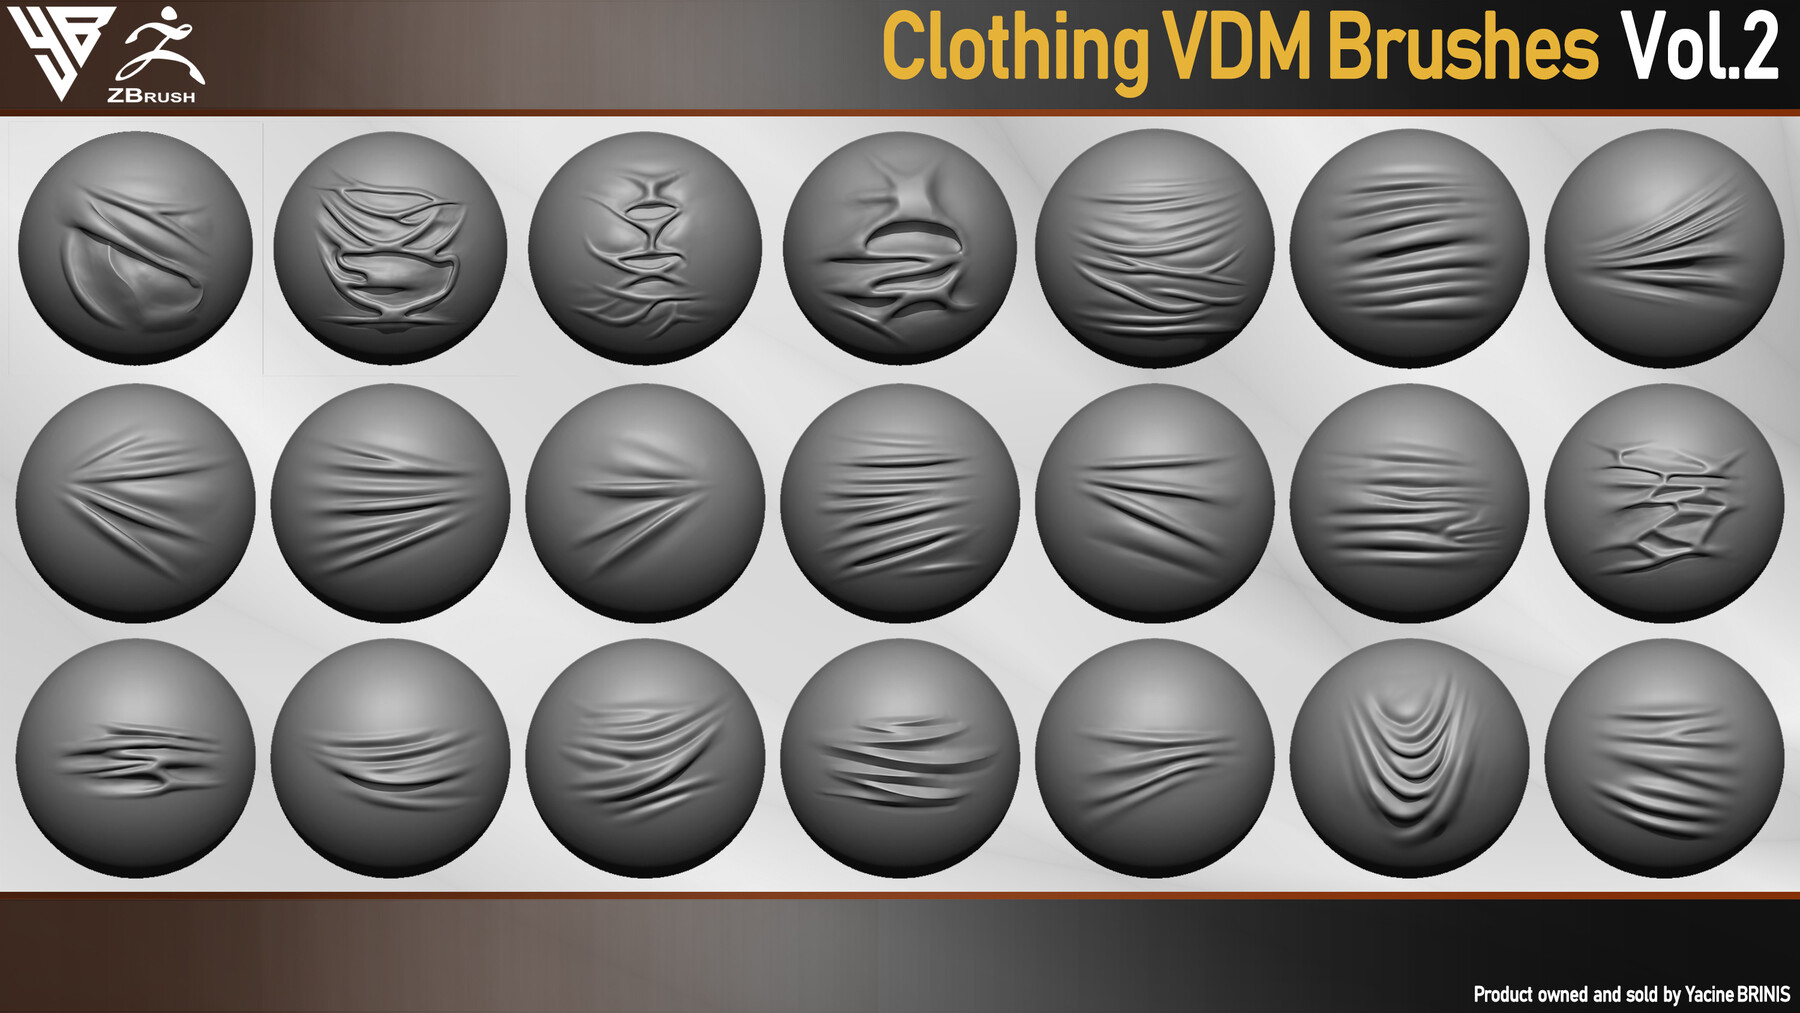 zbrush sculpt wrinkles on clothing